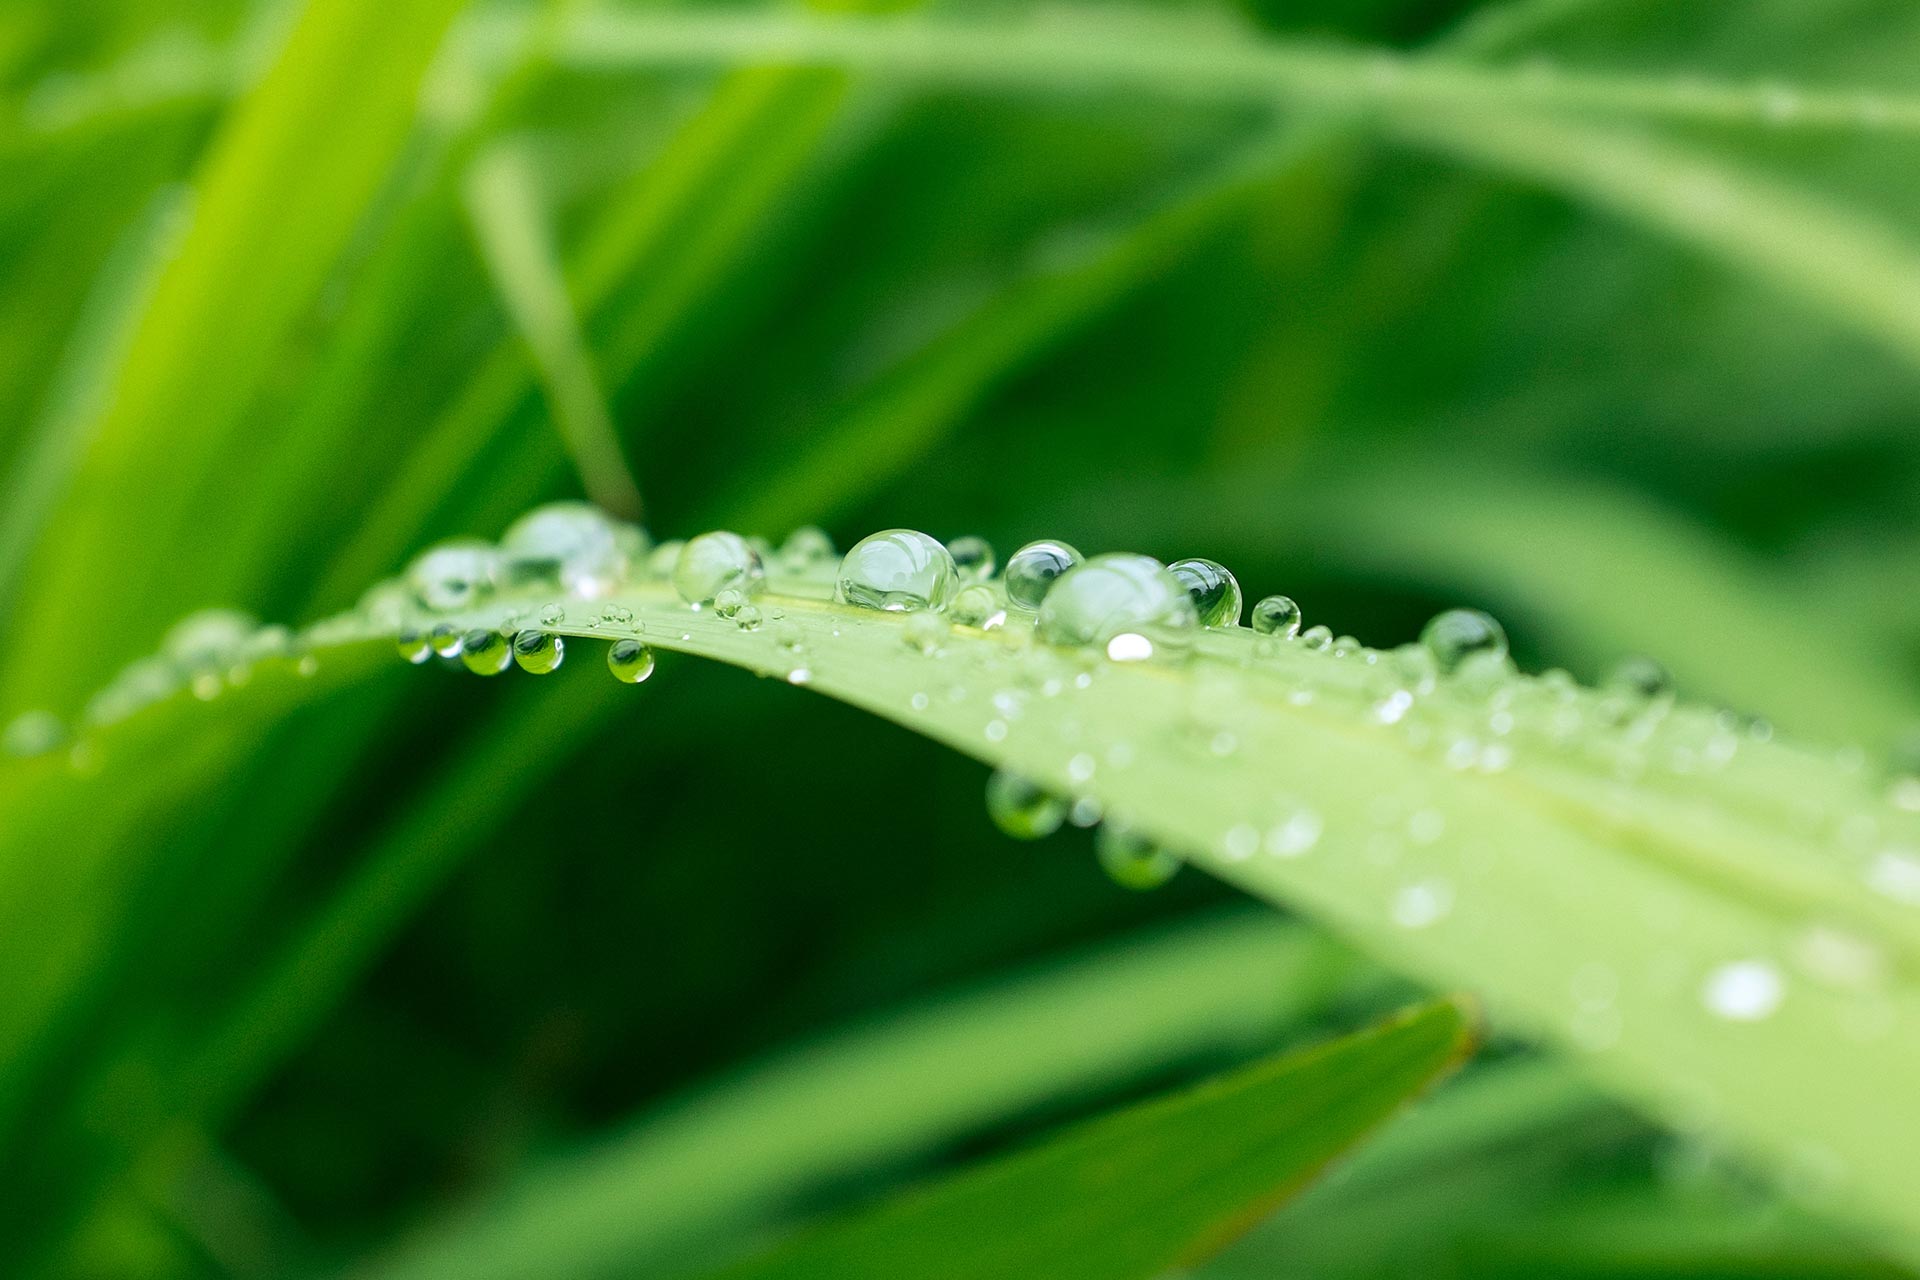 Where does the perfume of rain come from?